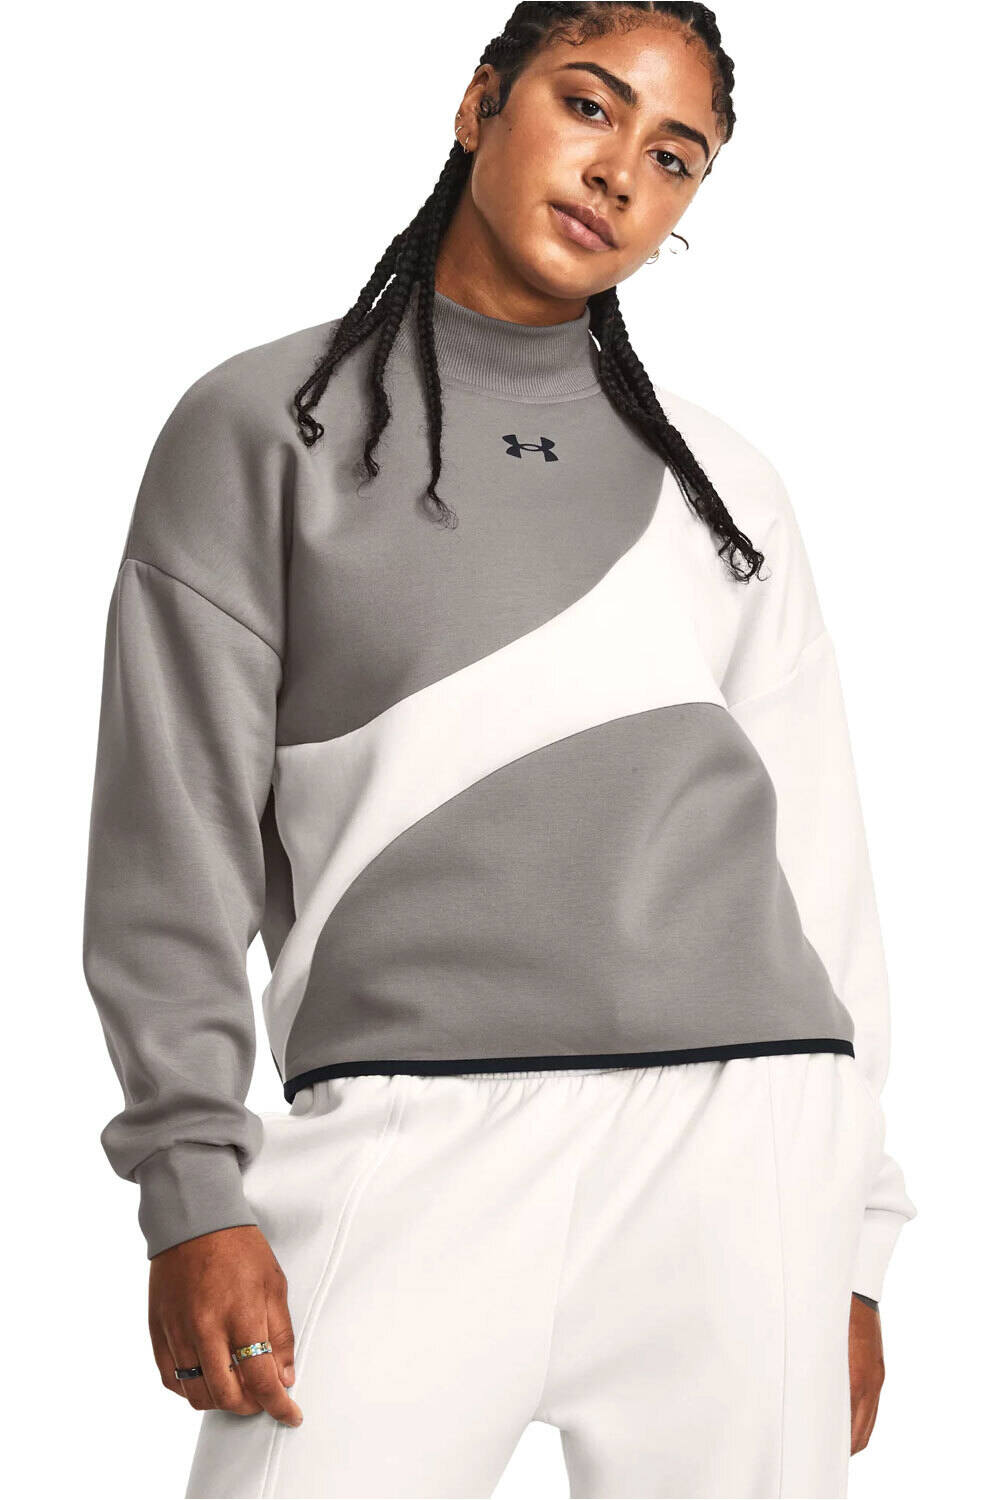 Under Armour sudadera mujer Unstoppable Flc Crop Crew vista frontal